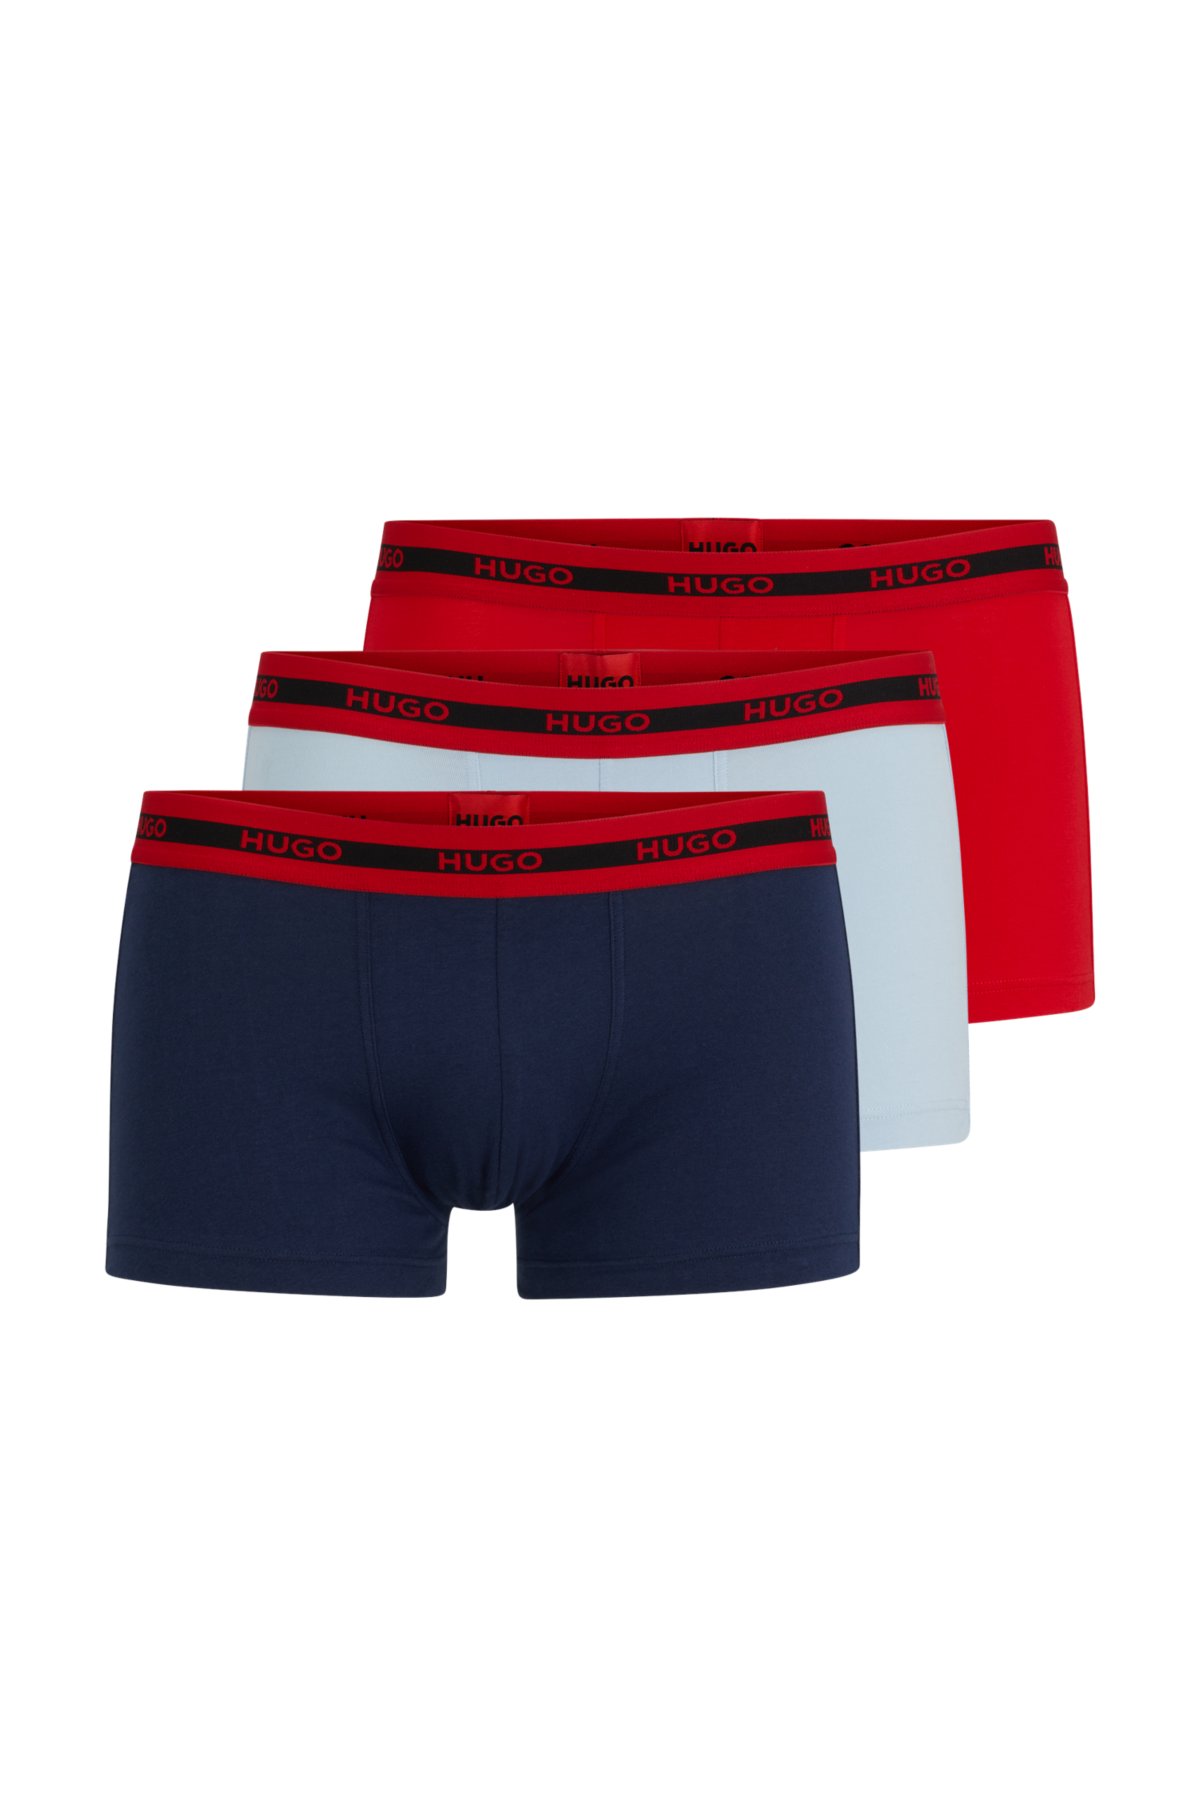 HUGO - Three-pack of stretch-cotton trunks with logo waistbands